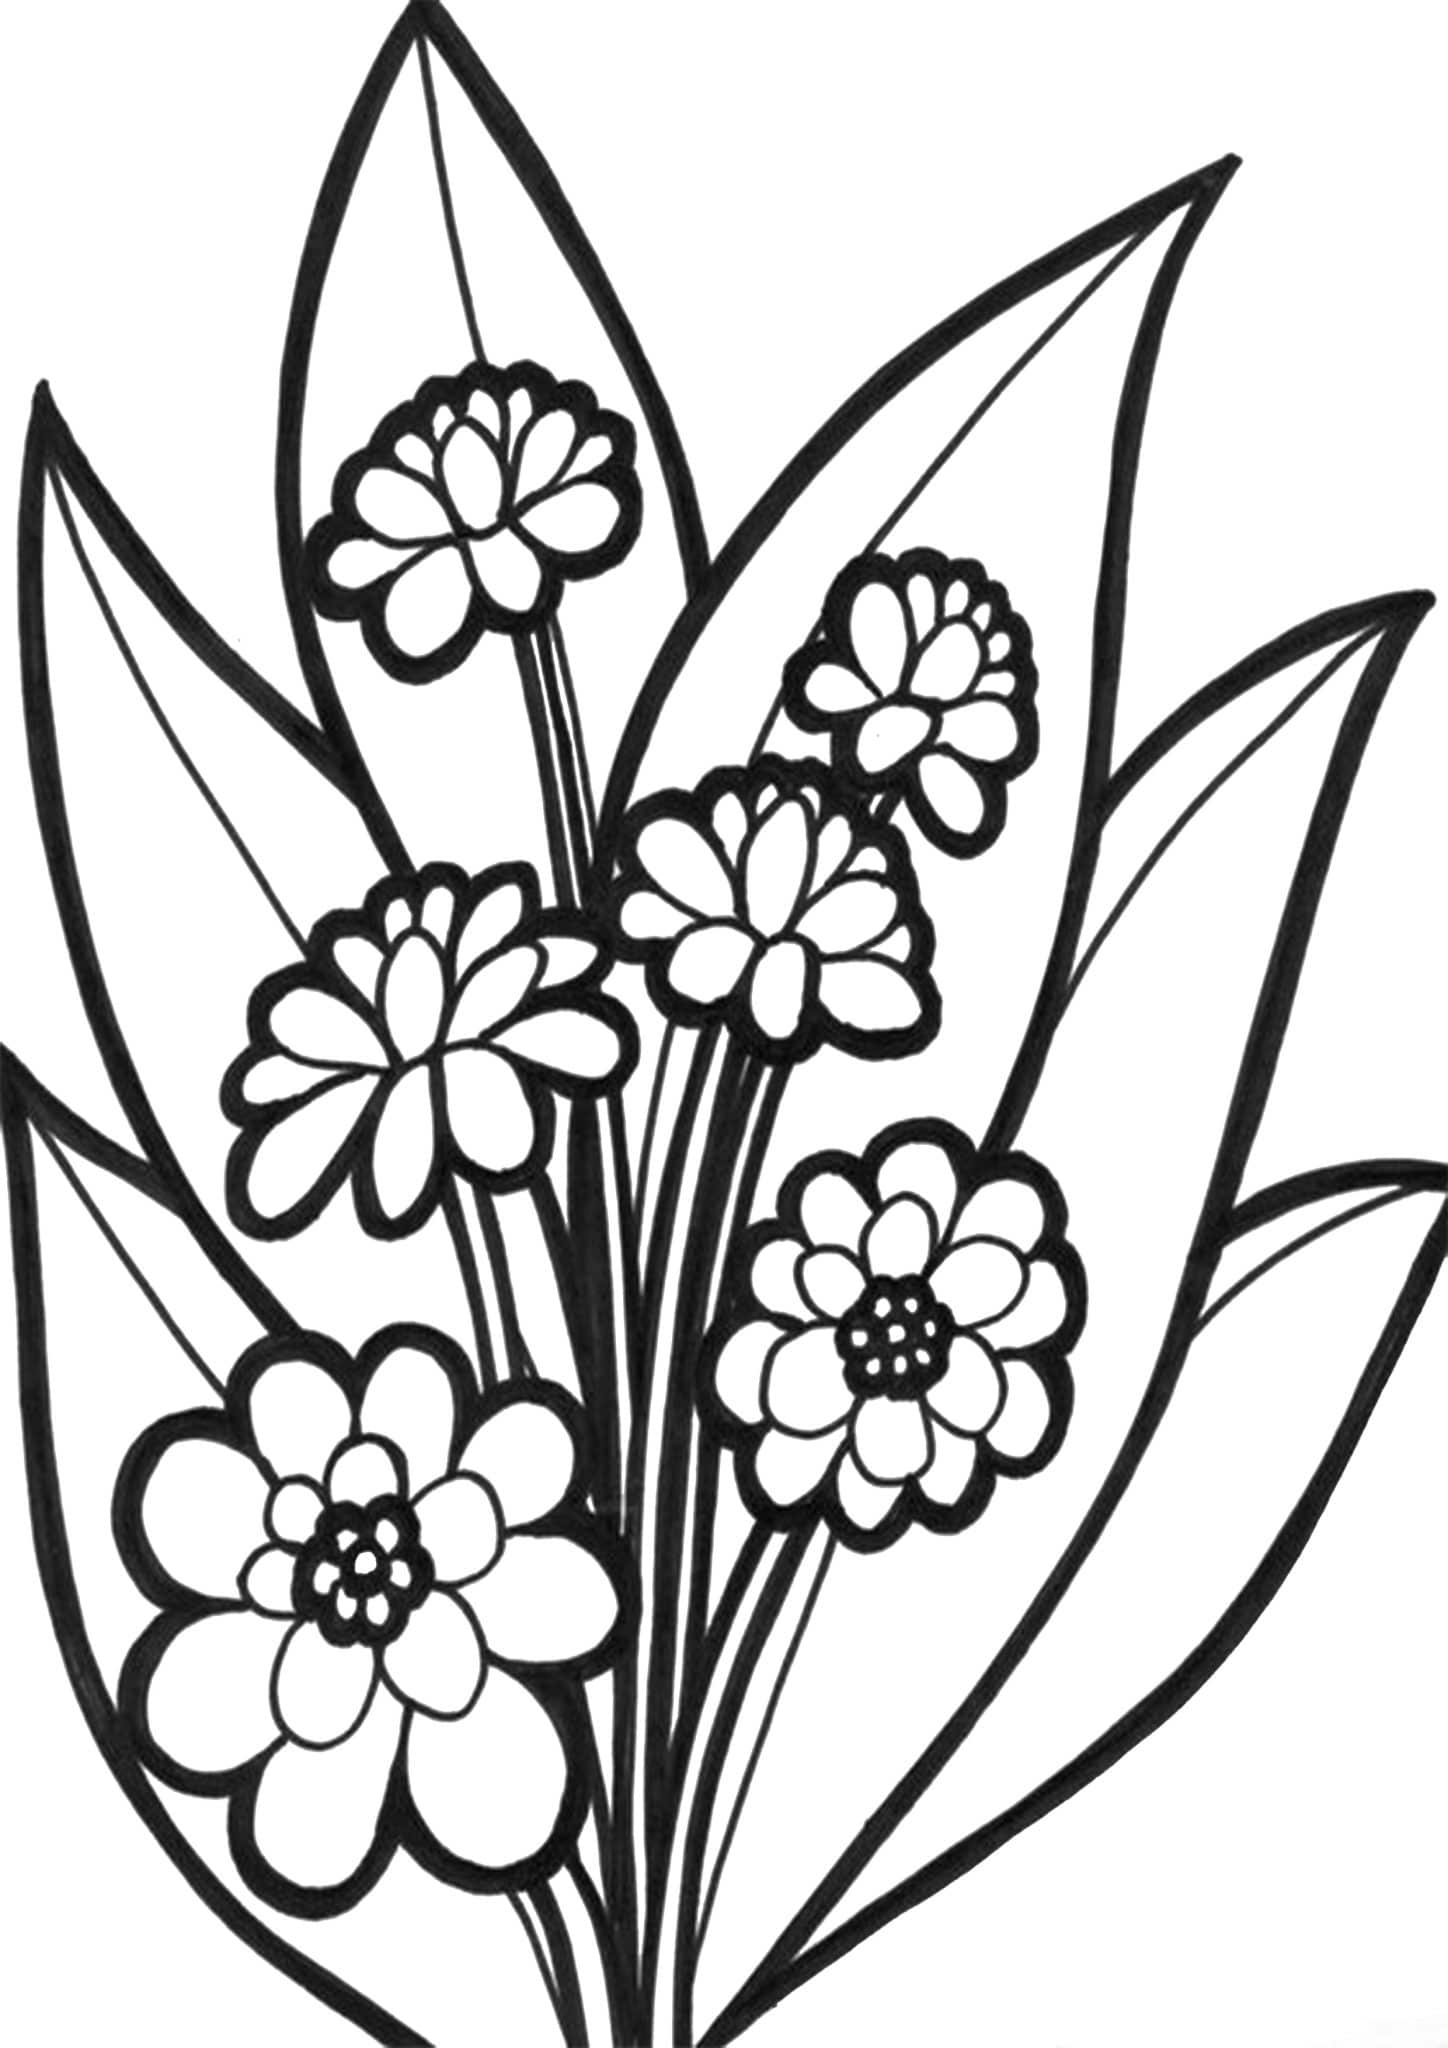 Free Printable Flower Coloring Pages For Kids Best Coloring Pages For Free Printable Flower